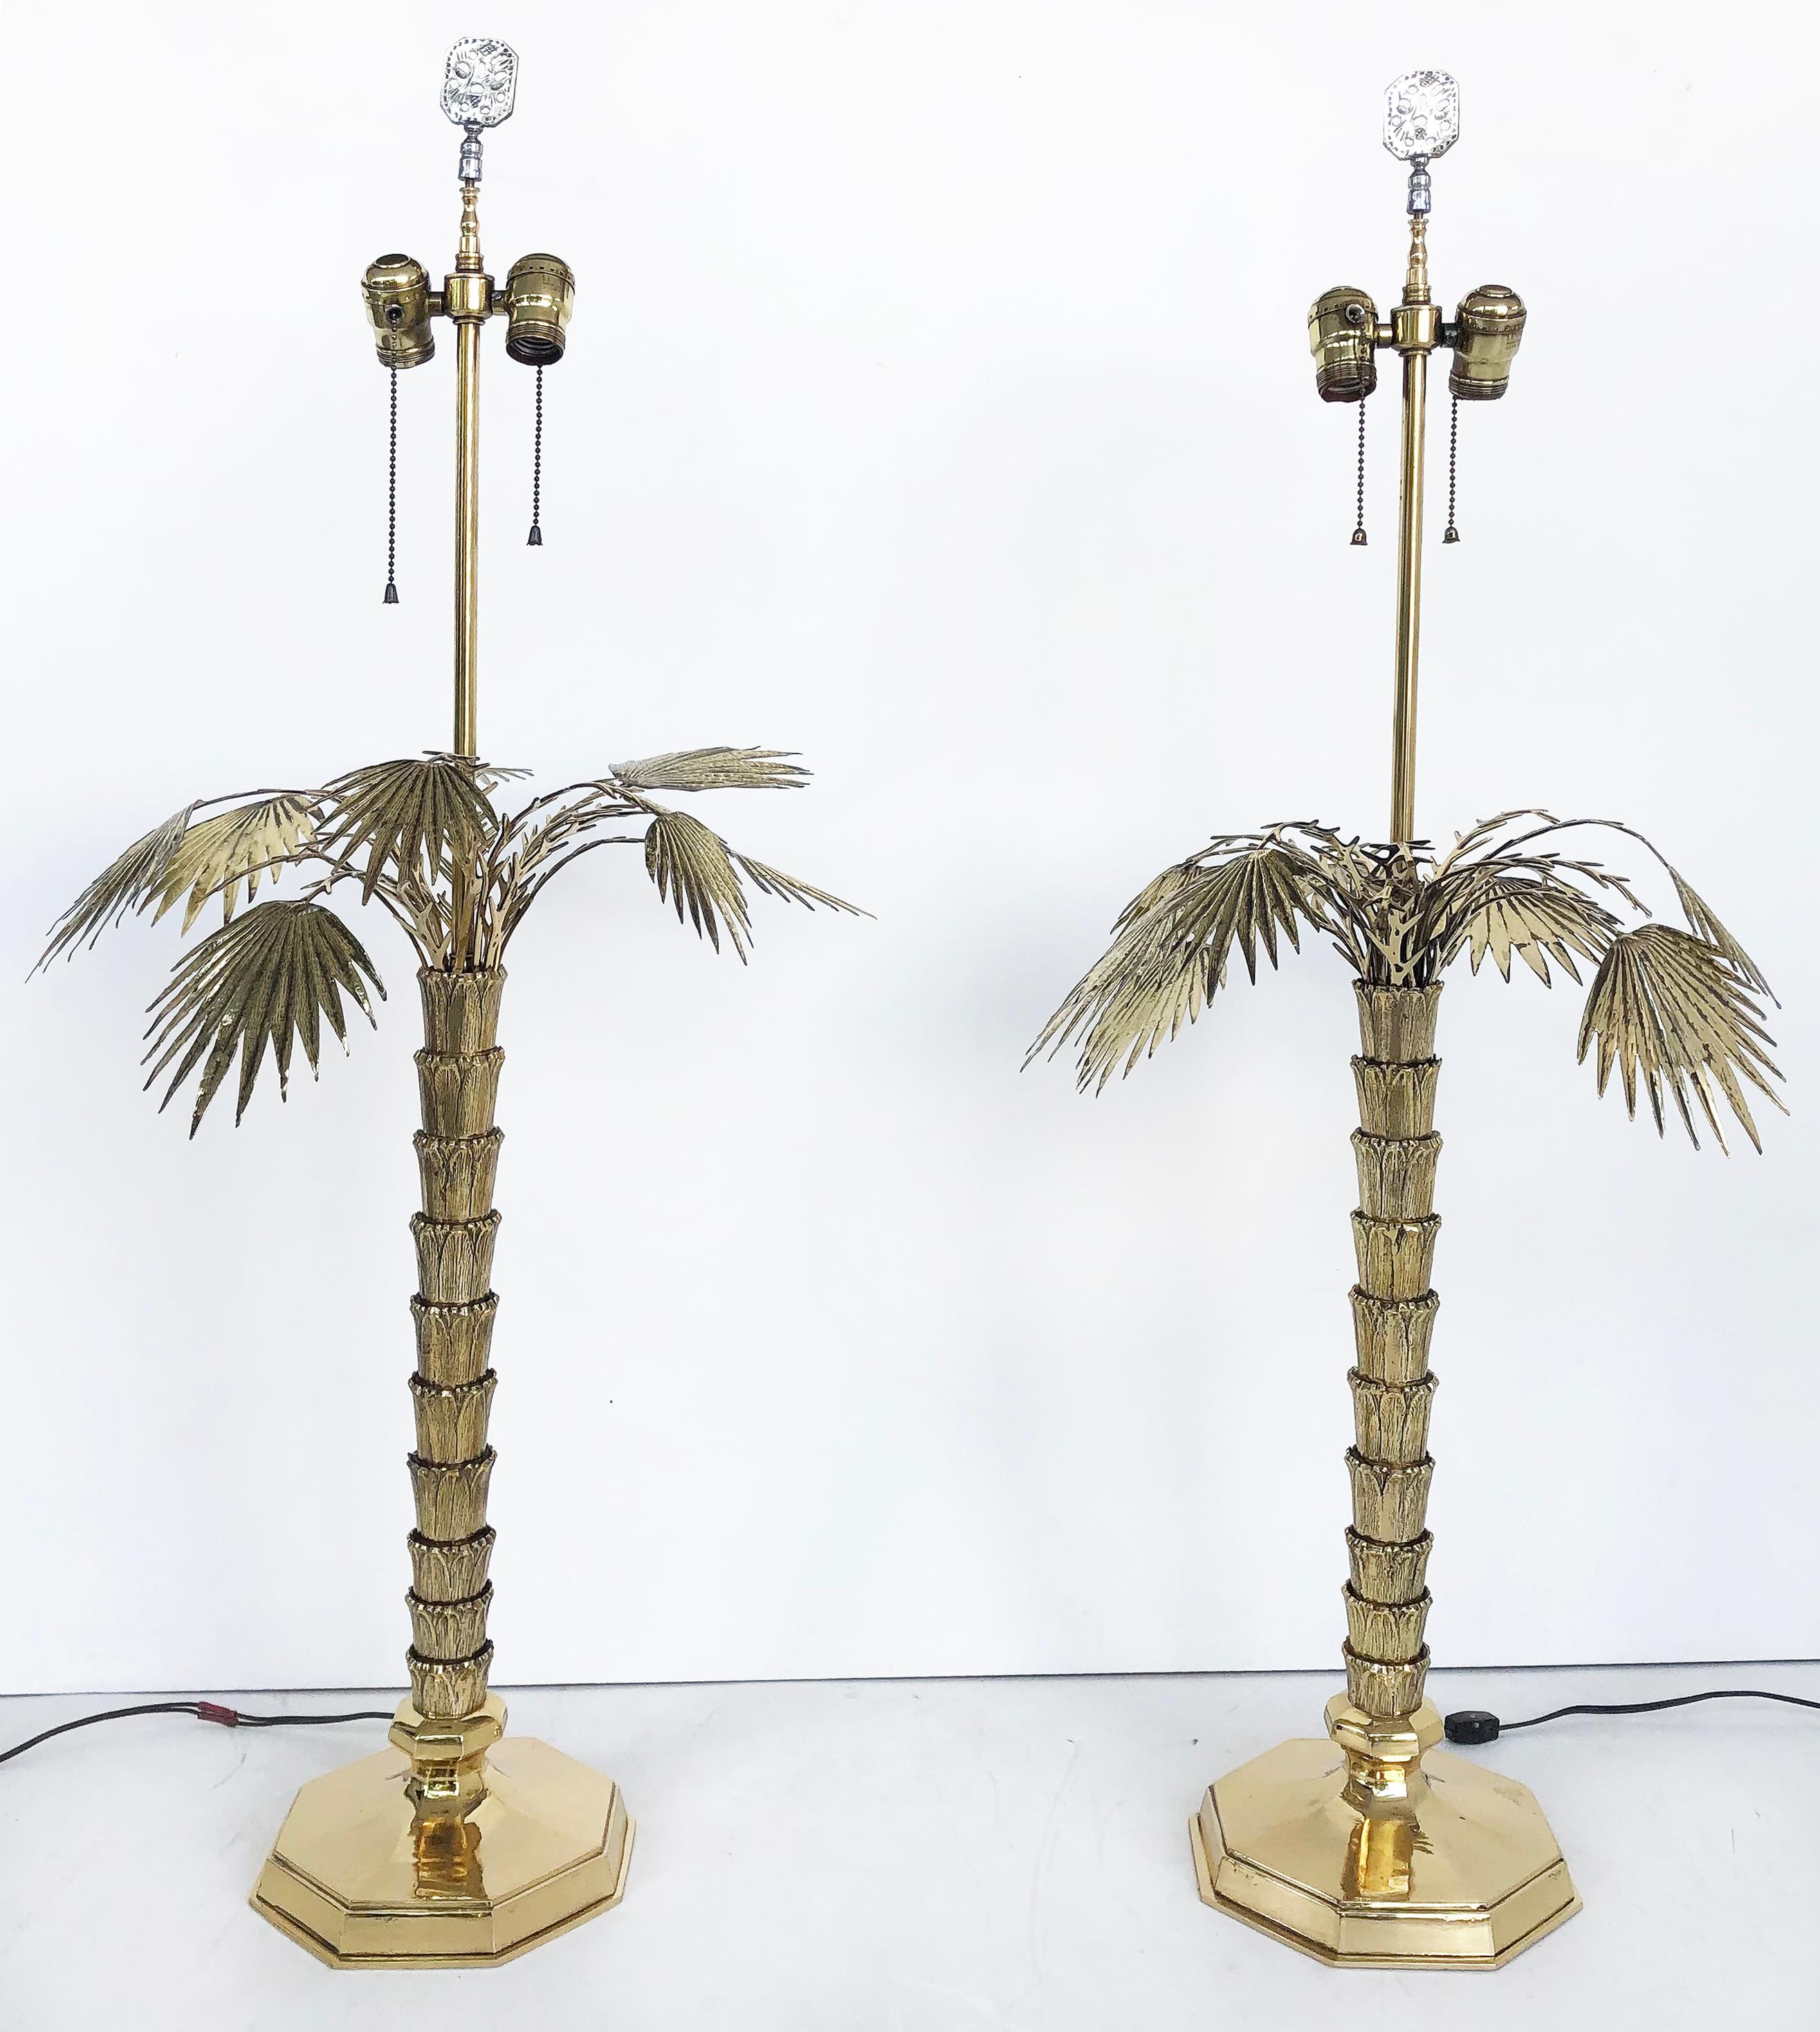 1970s Chapman Brass Palm Tree table lamps, pair

Offered for sale is a pair of Chapman brass palm tree table lamps c1970. The lamps are wired and in working condition. They accommodate two standard bulbs, have pull chains and in-line power